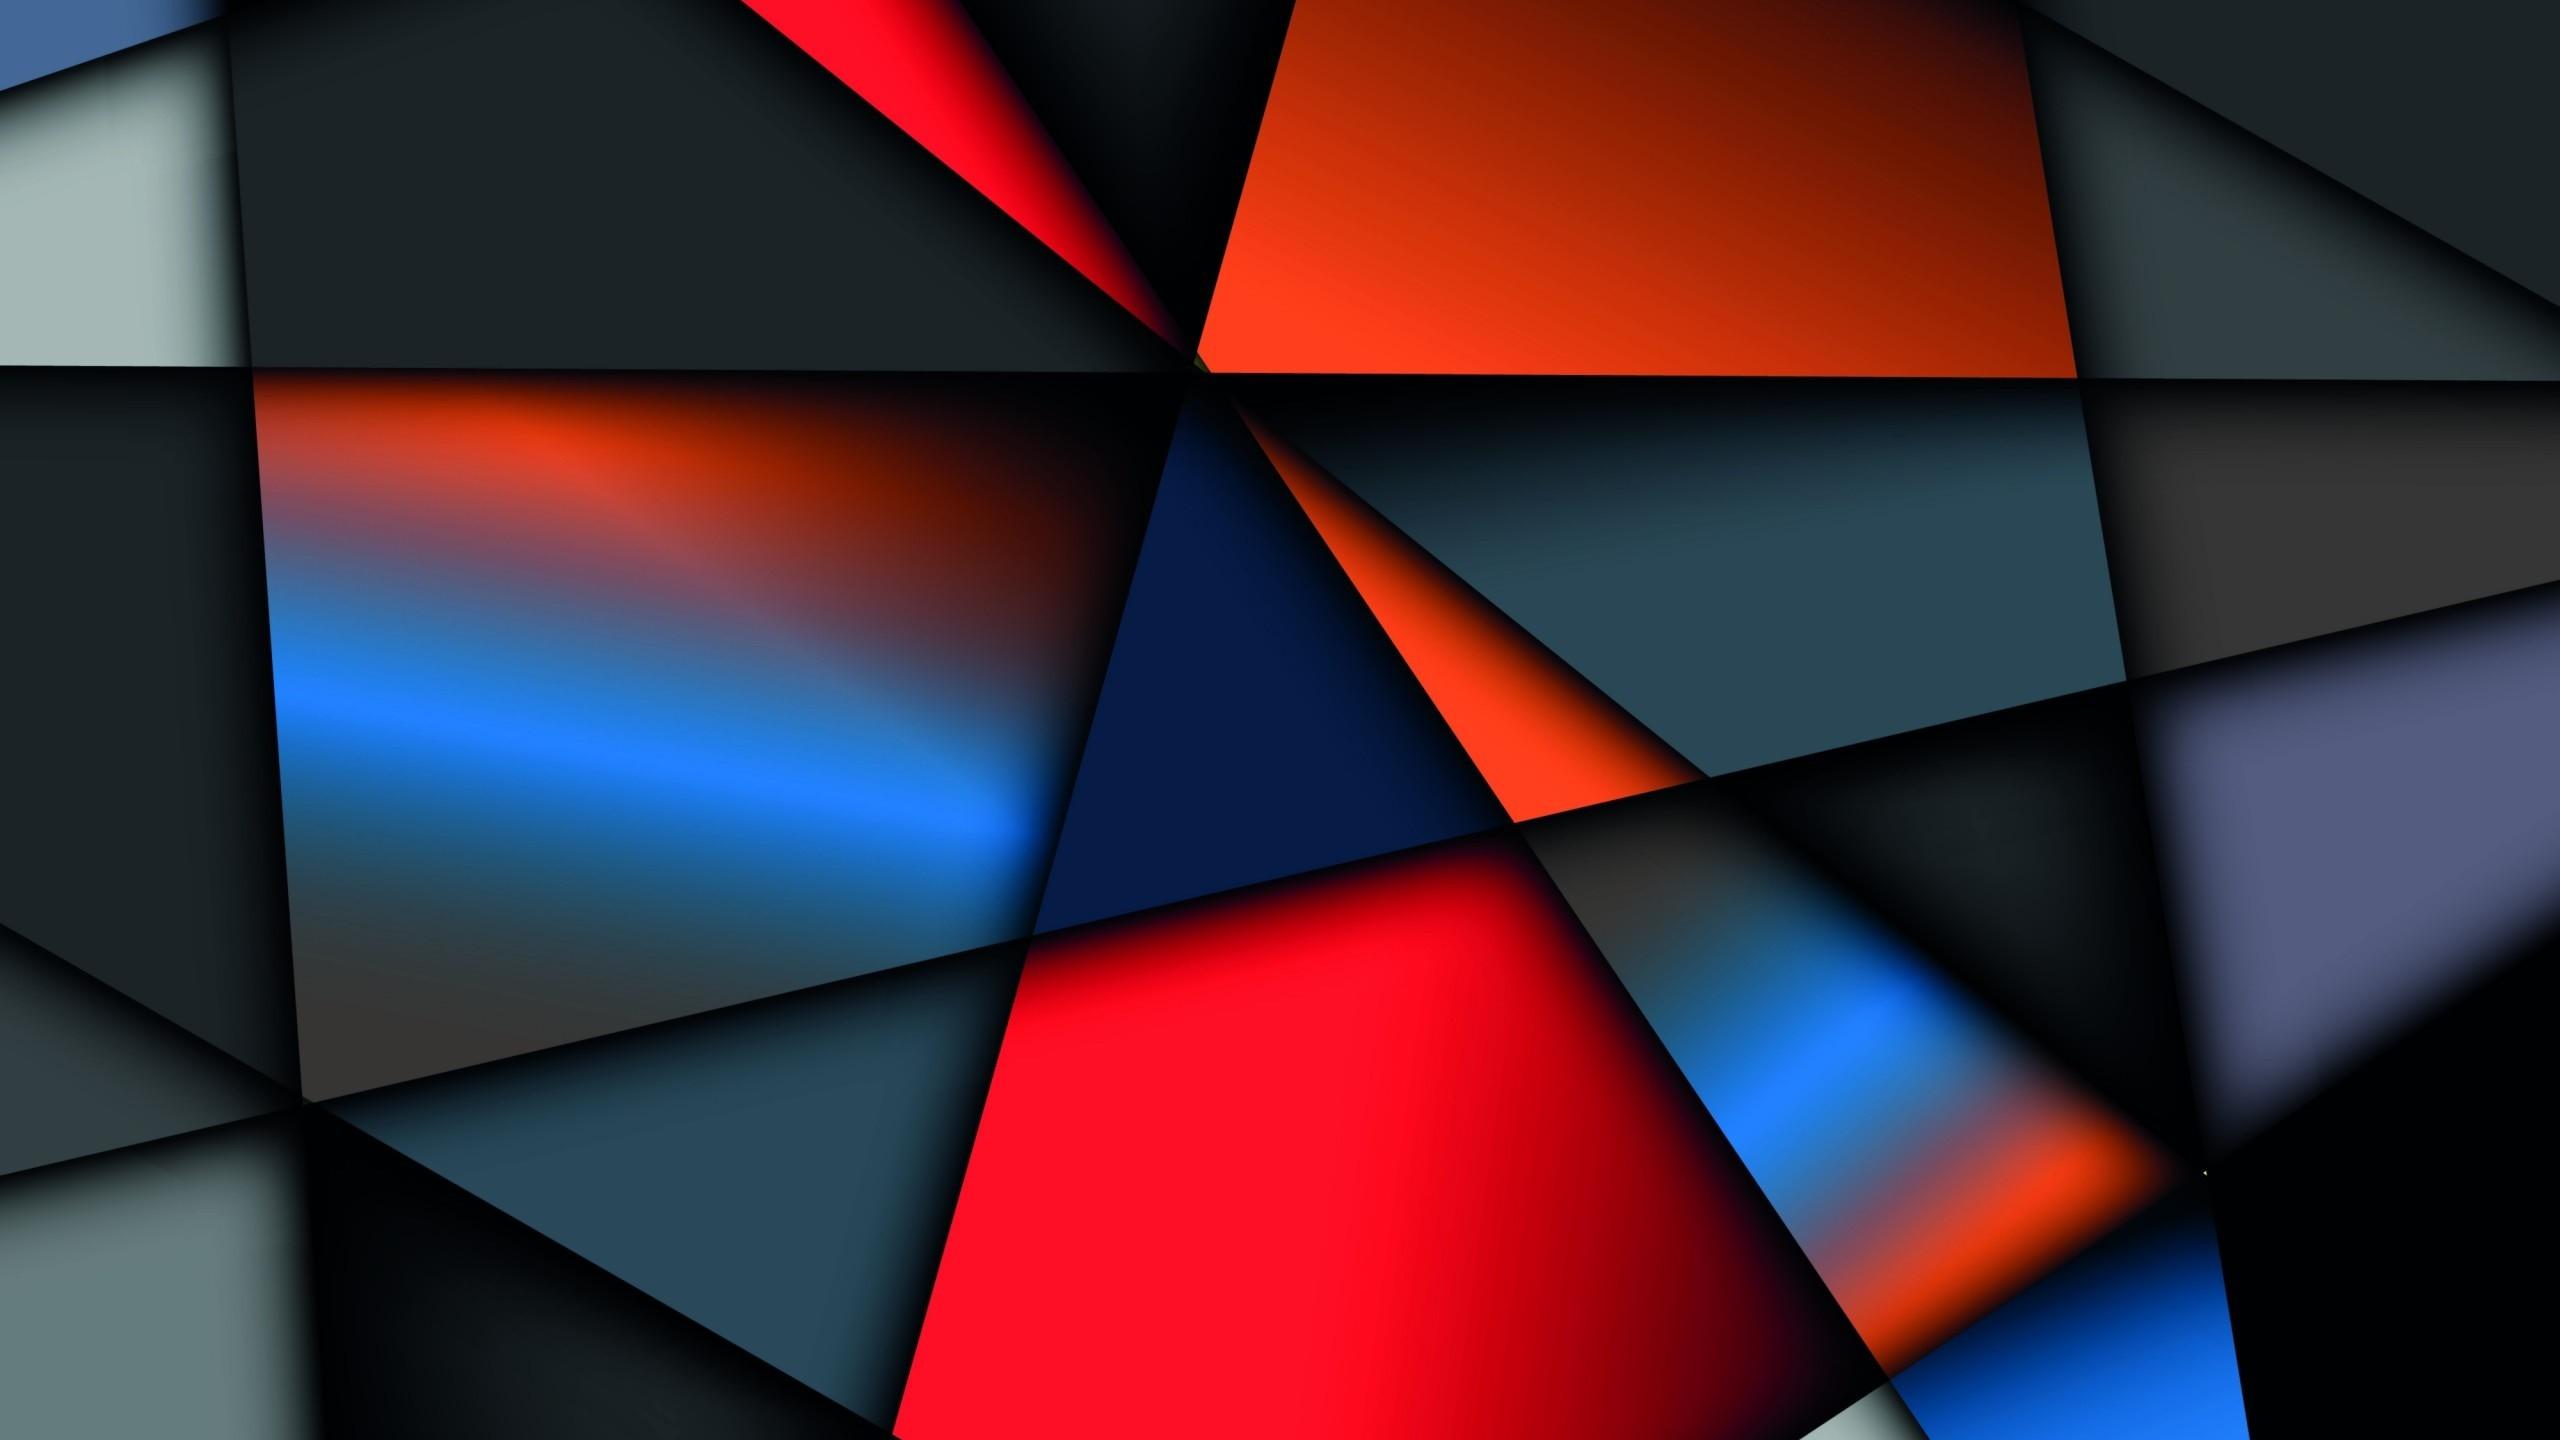 3D And Abstract Ultra HD Wallpaper 53 2560x1440